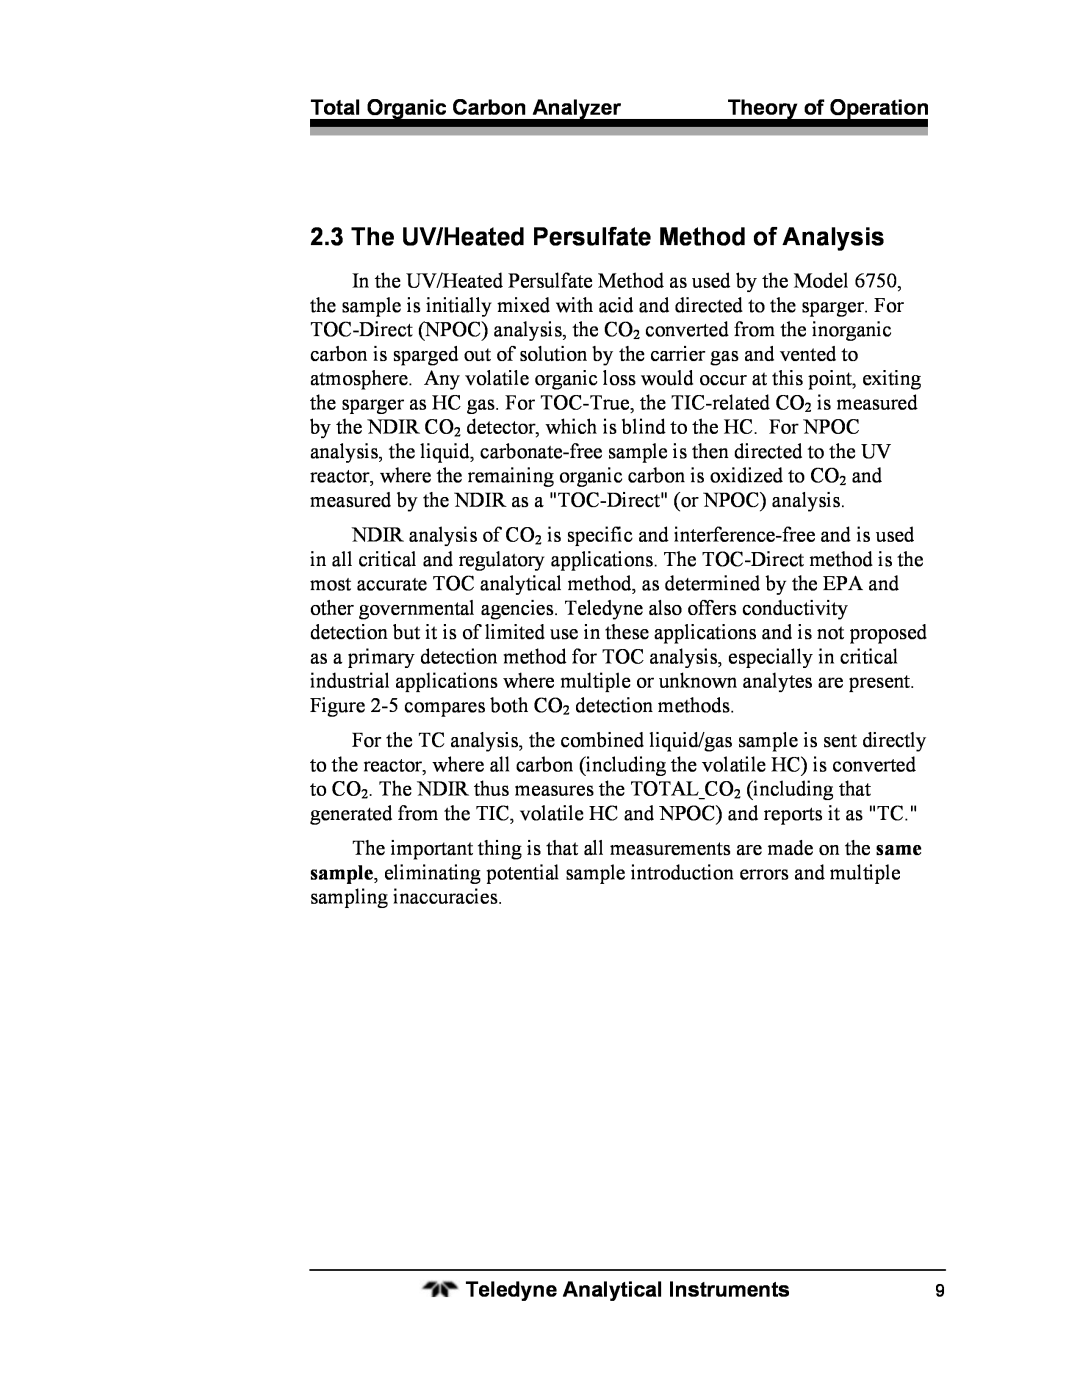 Teledyne 6750 operating instructions The UV/Heated Persulfate Method of Analysis 